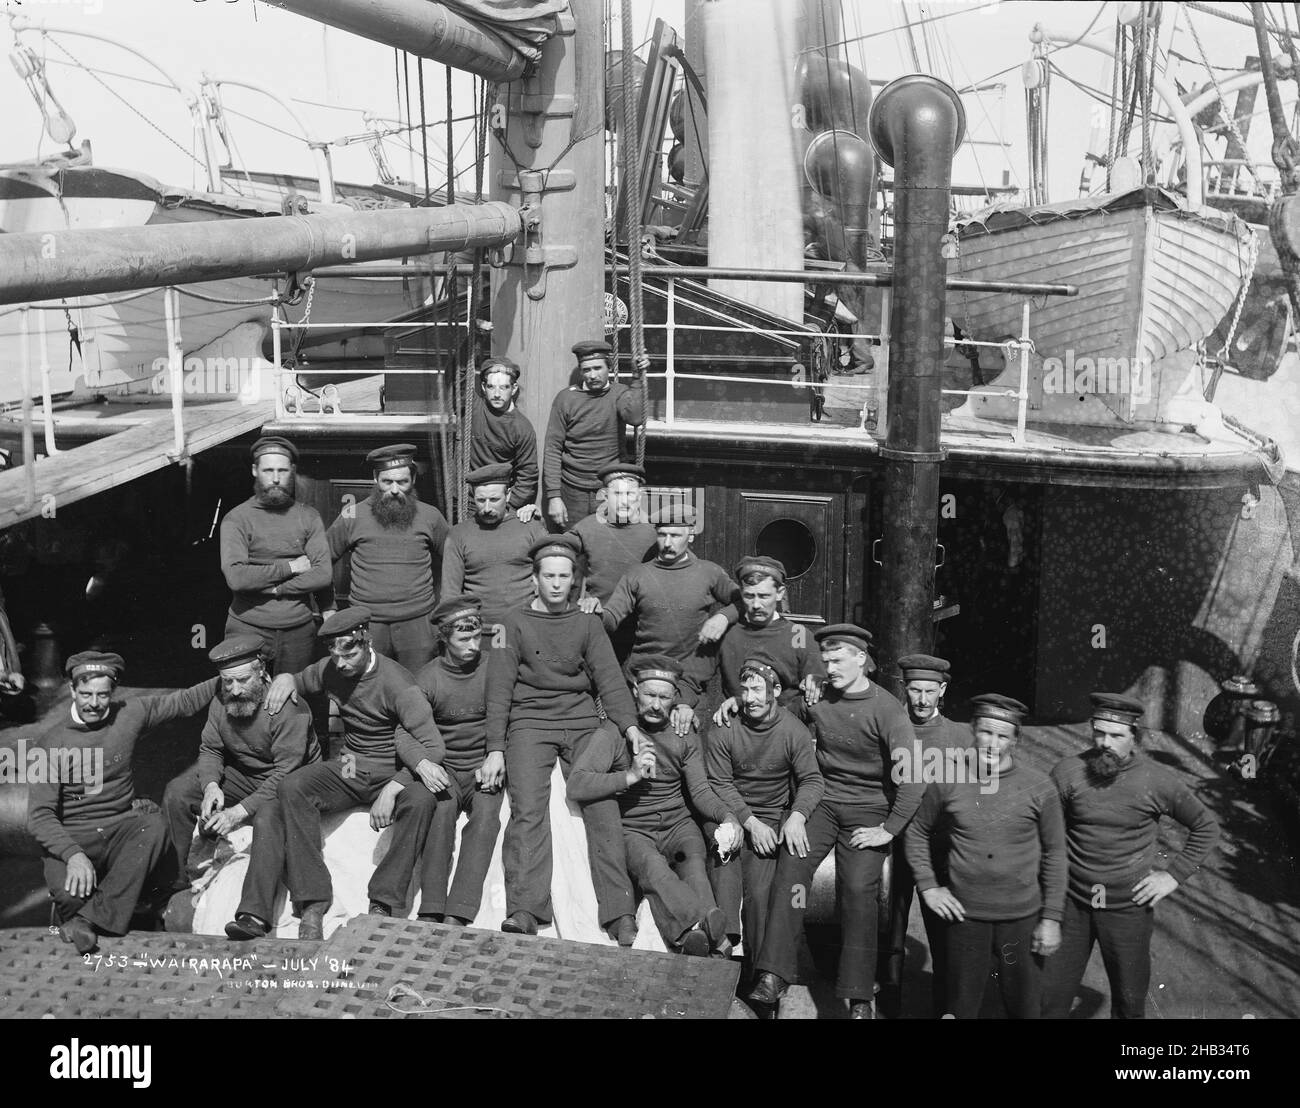 Wairarapa - July '84, Burton Brothers studio, photography studio, 1884, New Zealand, black-and-white photography, Crew of large ship on bottom deck. Nineteen men in Union Steamship Company uniform. Funnel and hight deck behind, with longboats on either side Stock Photo